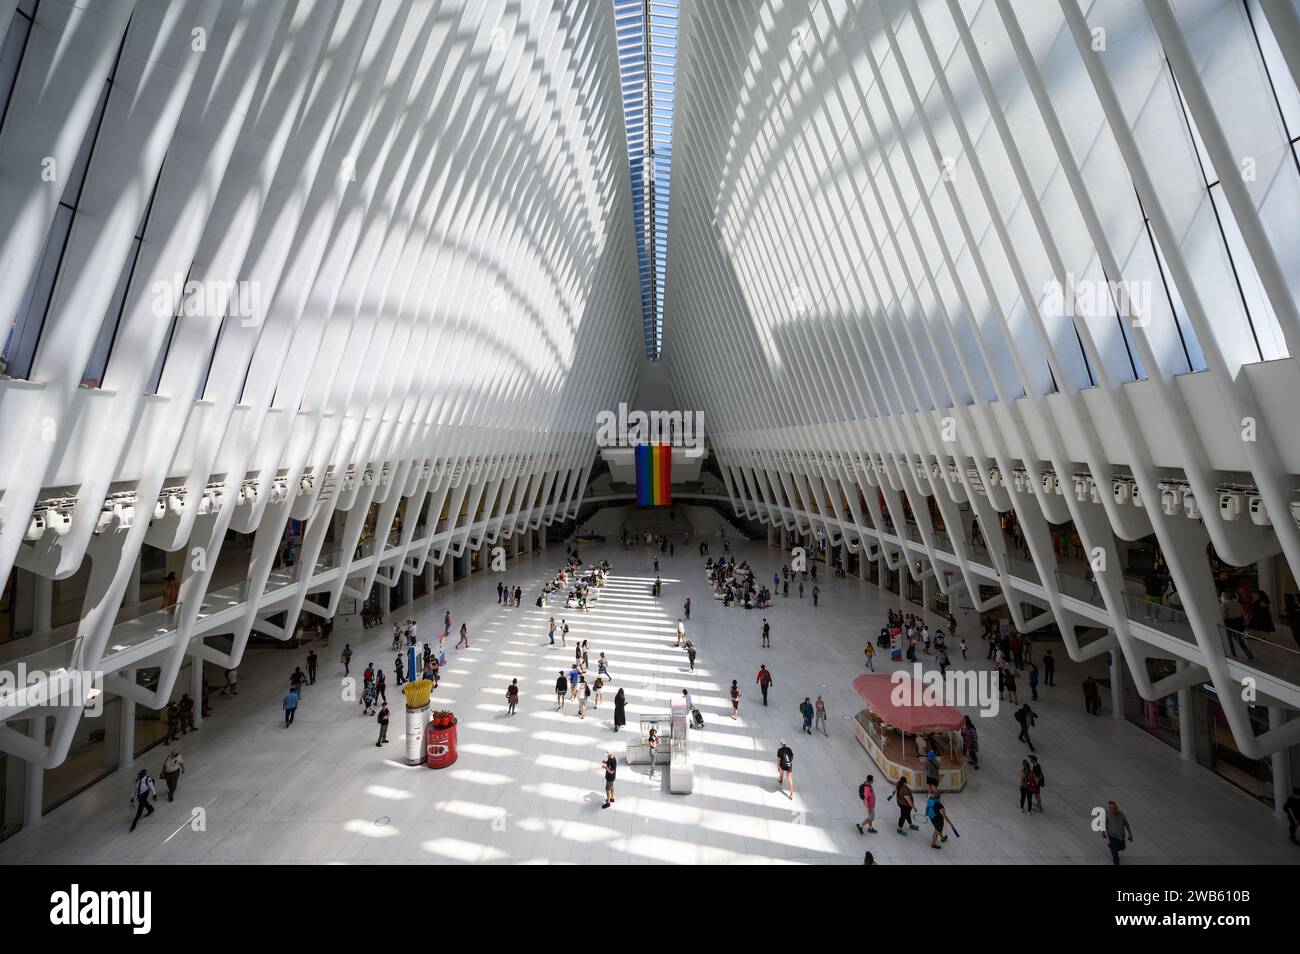 Interior of the Oculus subway station by Spanish architect Calatrava at the World Trade Center in New York. Stock Photo